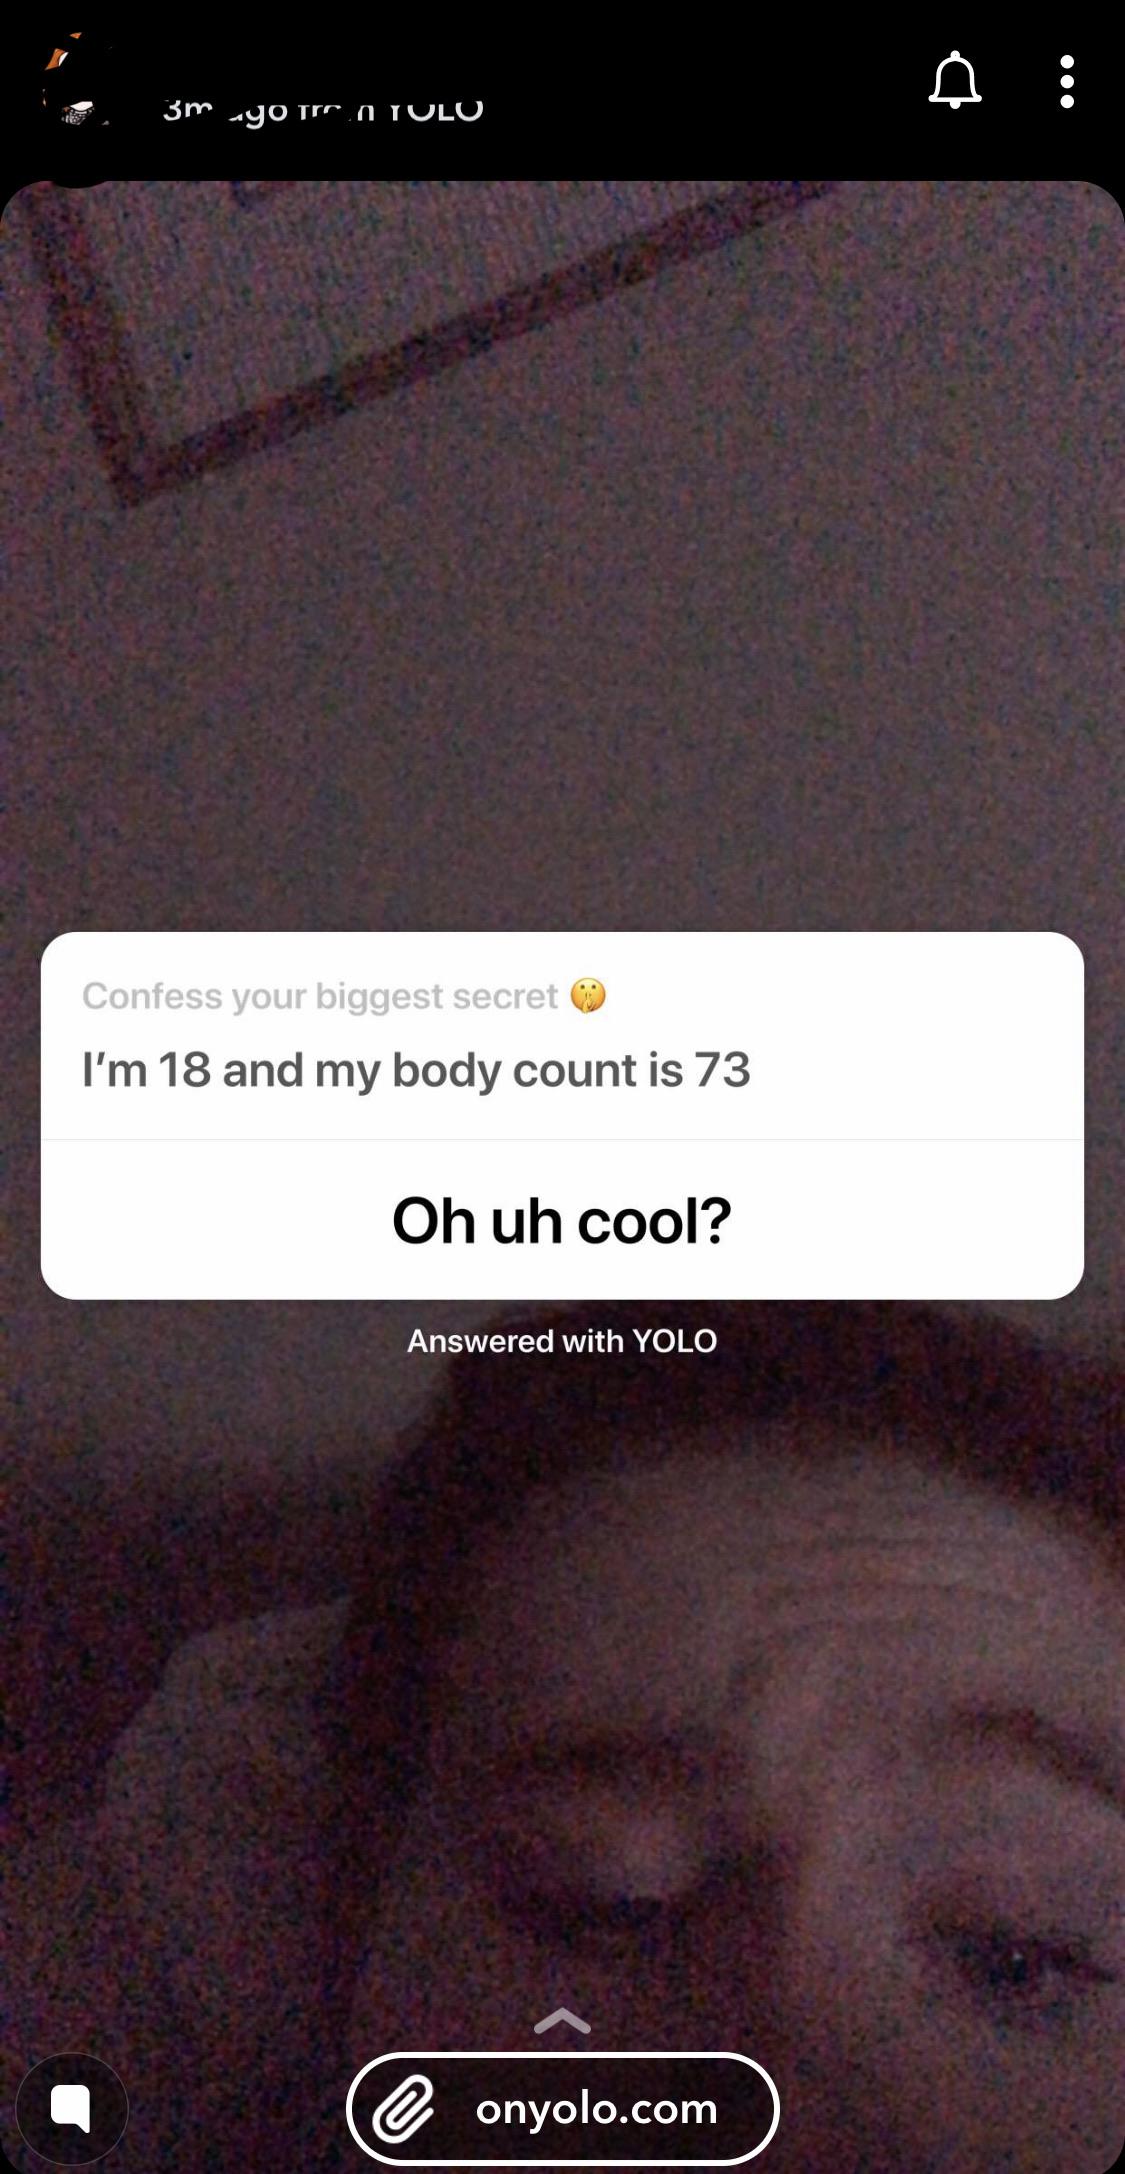 screenshot - 3m yor.Atolo Confess your biggest secret I'm 18 and my body count is 73 Oh uh cool? Answered with Yolo onyolo.com